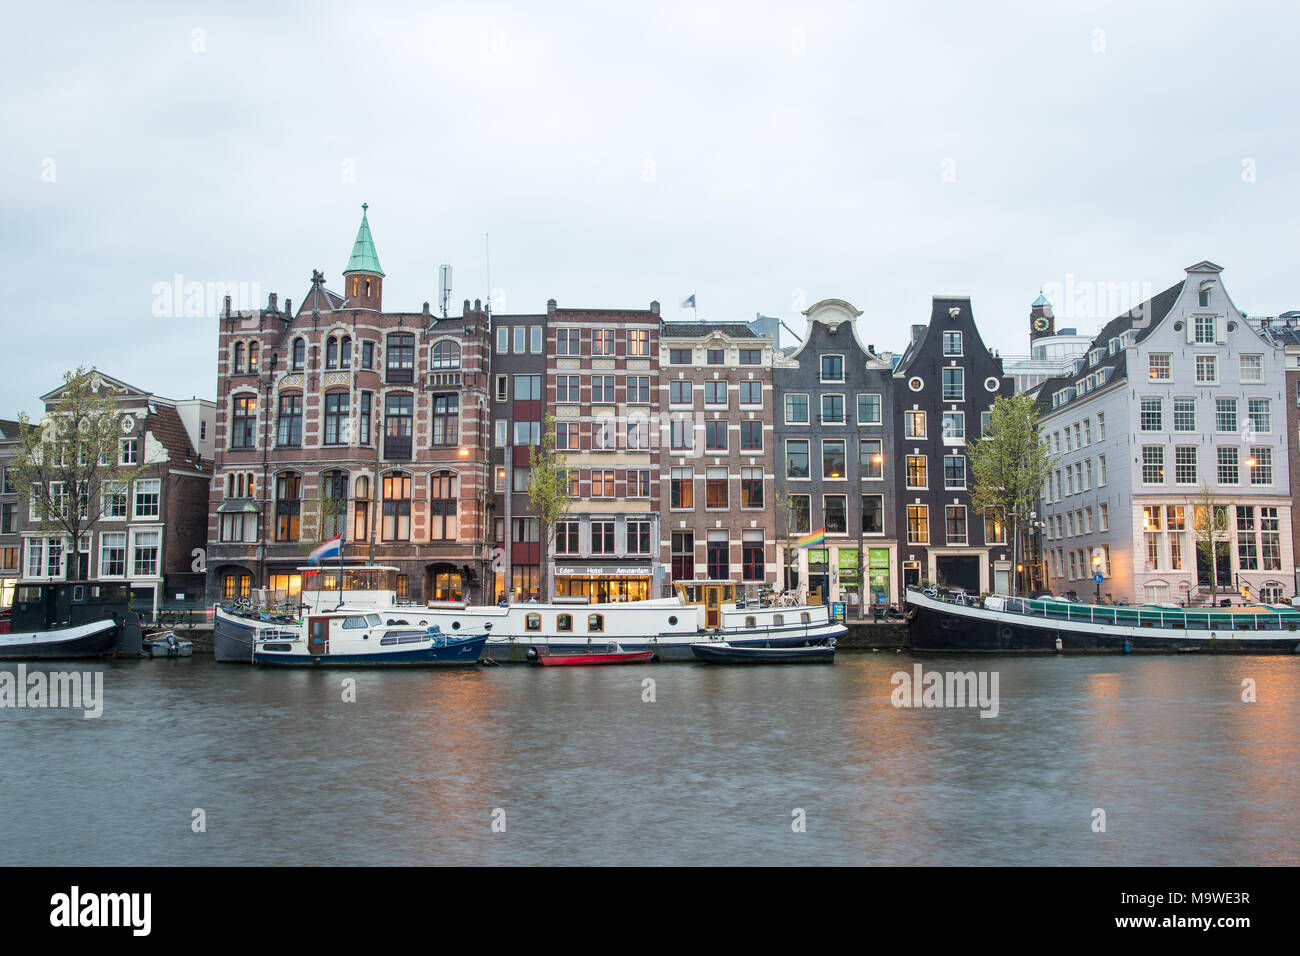 Amsterdam, Netherlands - April 21, 2017: Amsterdam canal and beautiful traditional old buildings, Netherlands Stock Photo